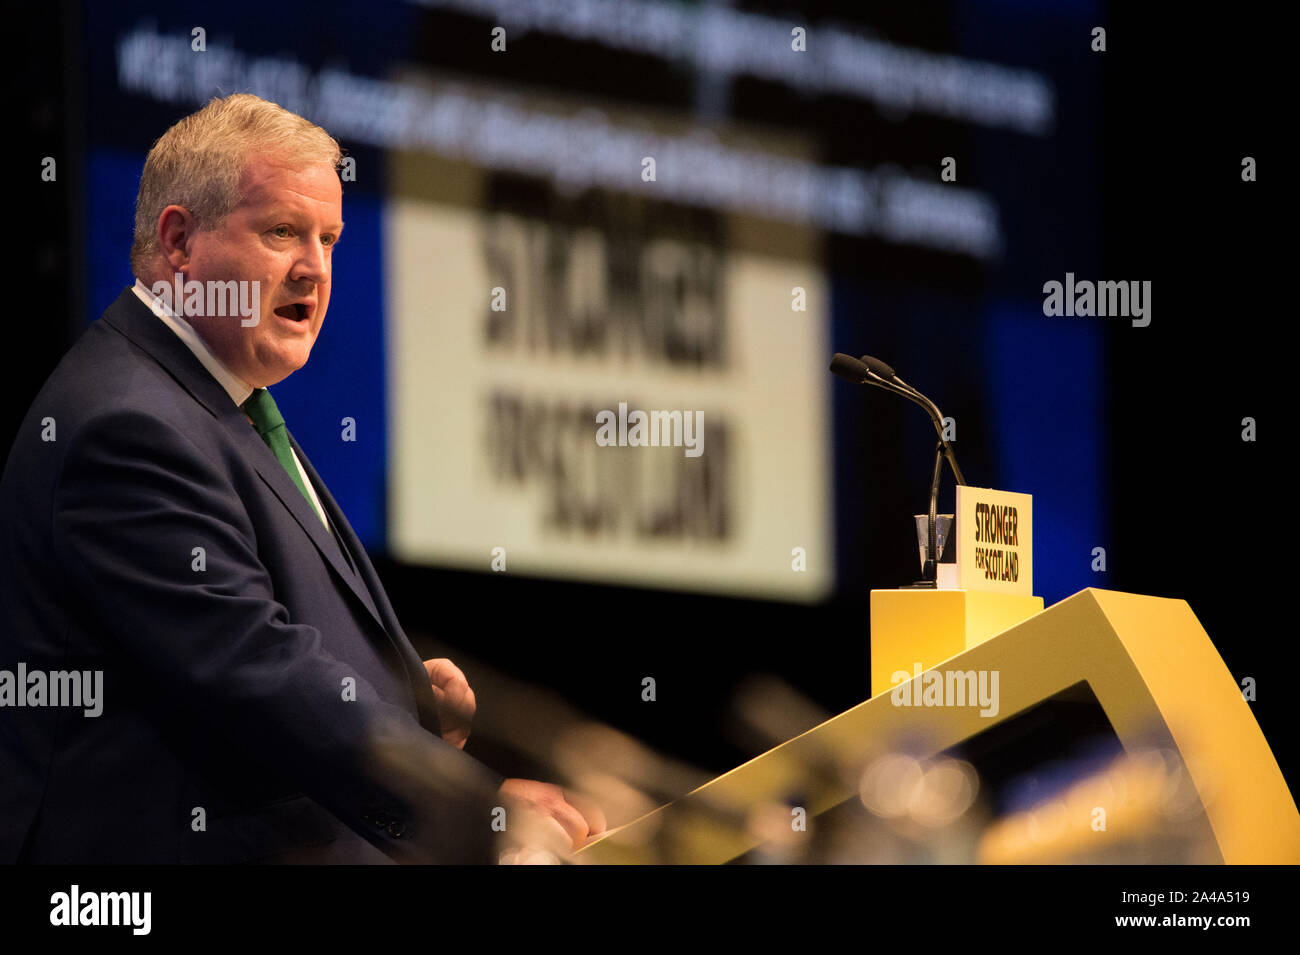 Aberdeen, UK. 13 October 2019.  Pictured: Ian Blackford MP - Westminster Leader for the Scottish National Party (SNP).  Scottish National Party (SNP) Conference at the Aberdeen Exhibition Conference Centre (AECC). Credit: Colin Fisher/Alamy Live News Stock Photo